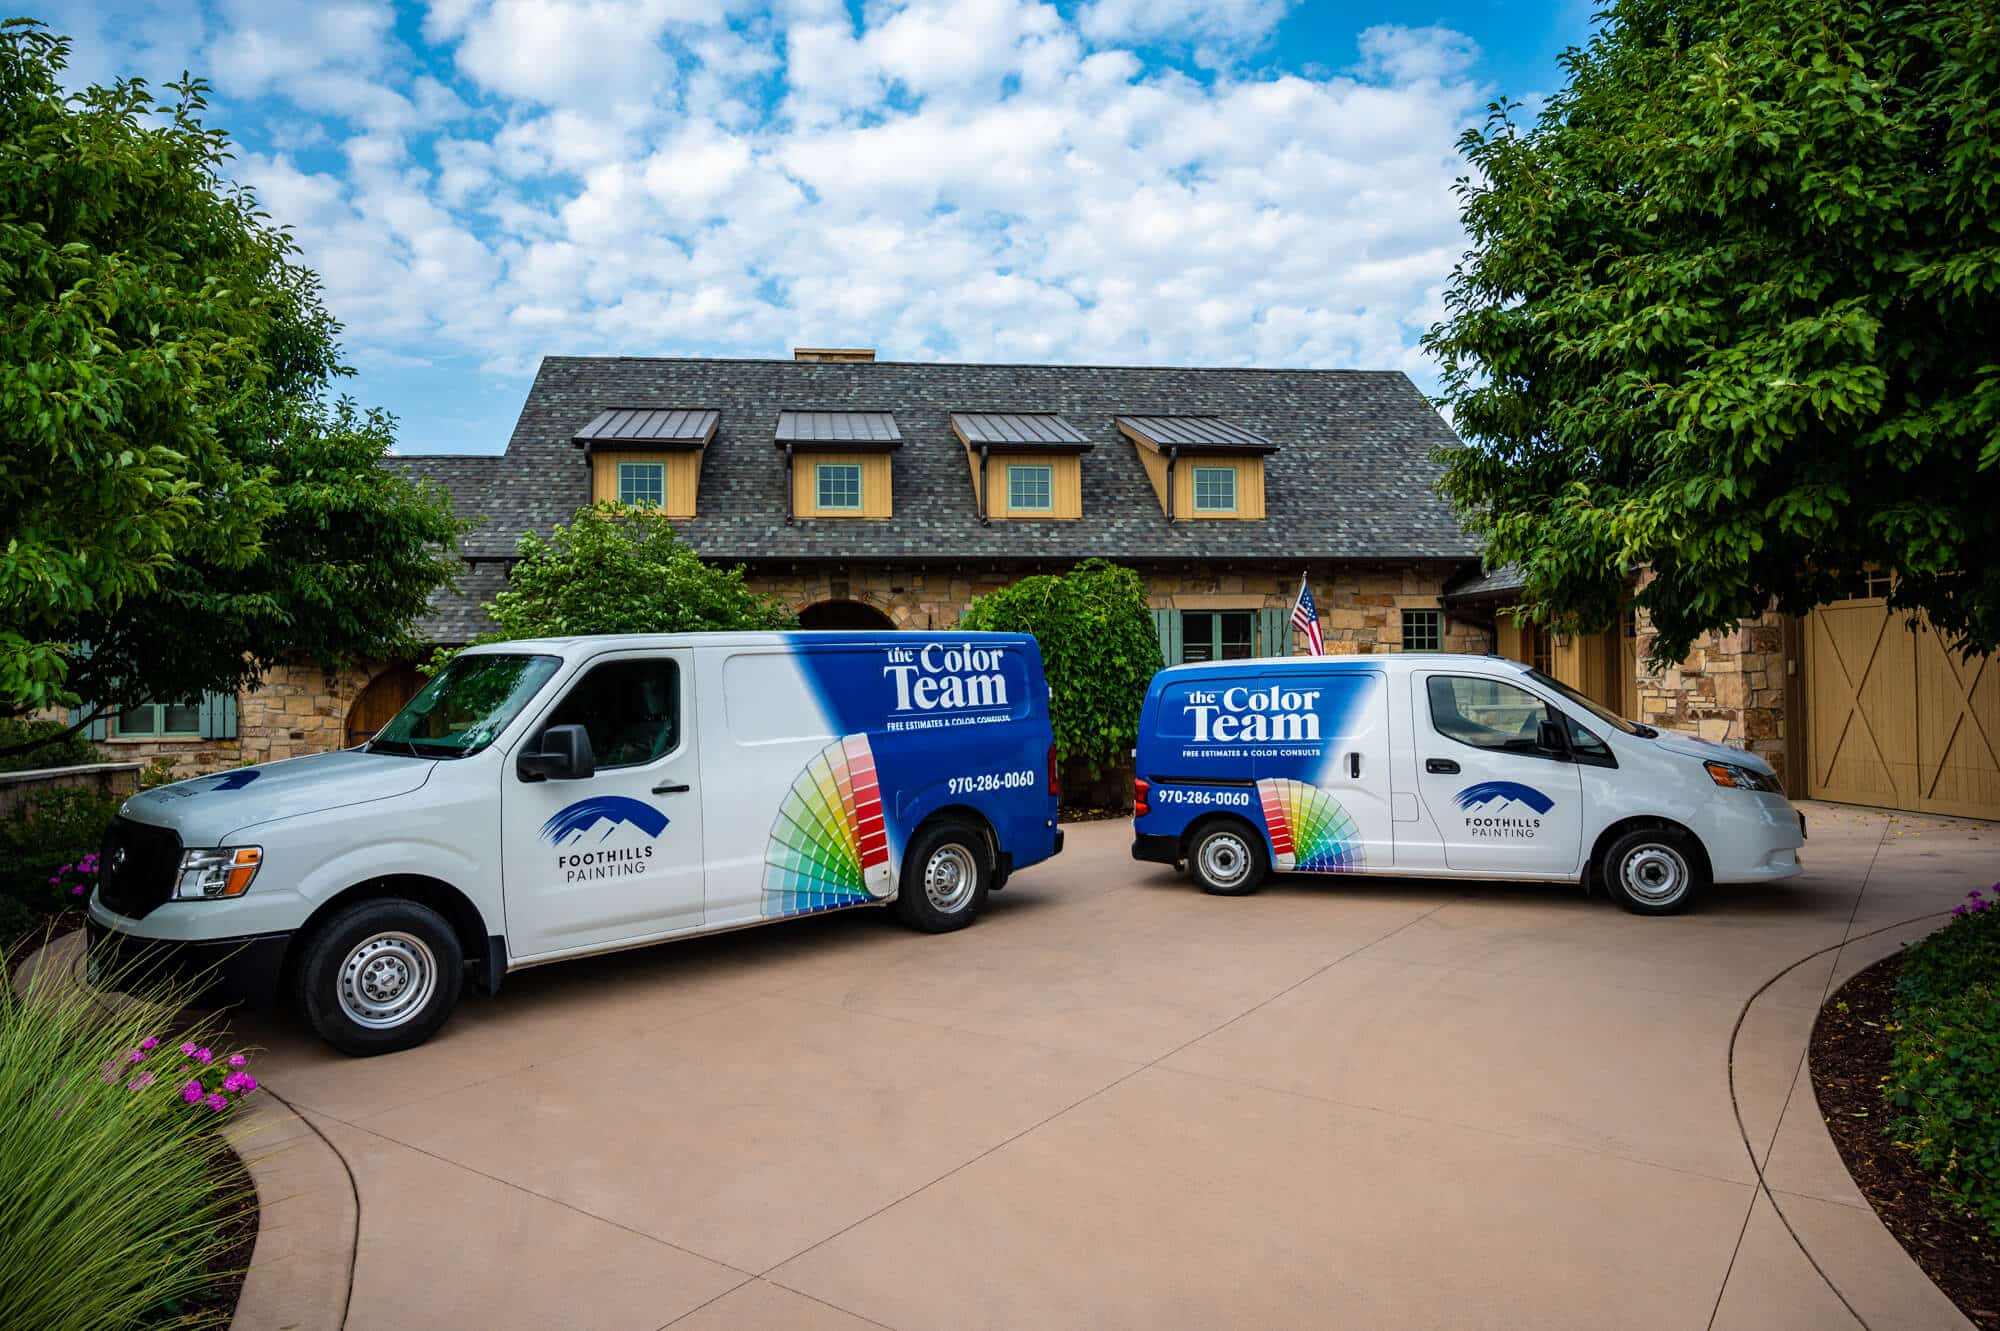 Quality Painting Services in Longmont, CO - Foothills Painting